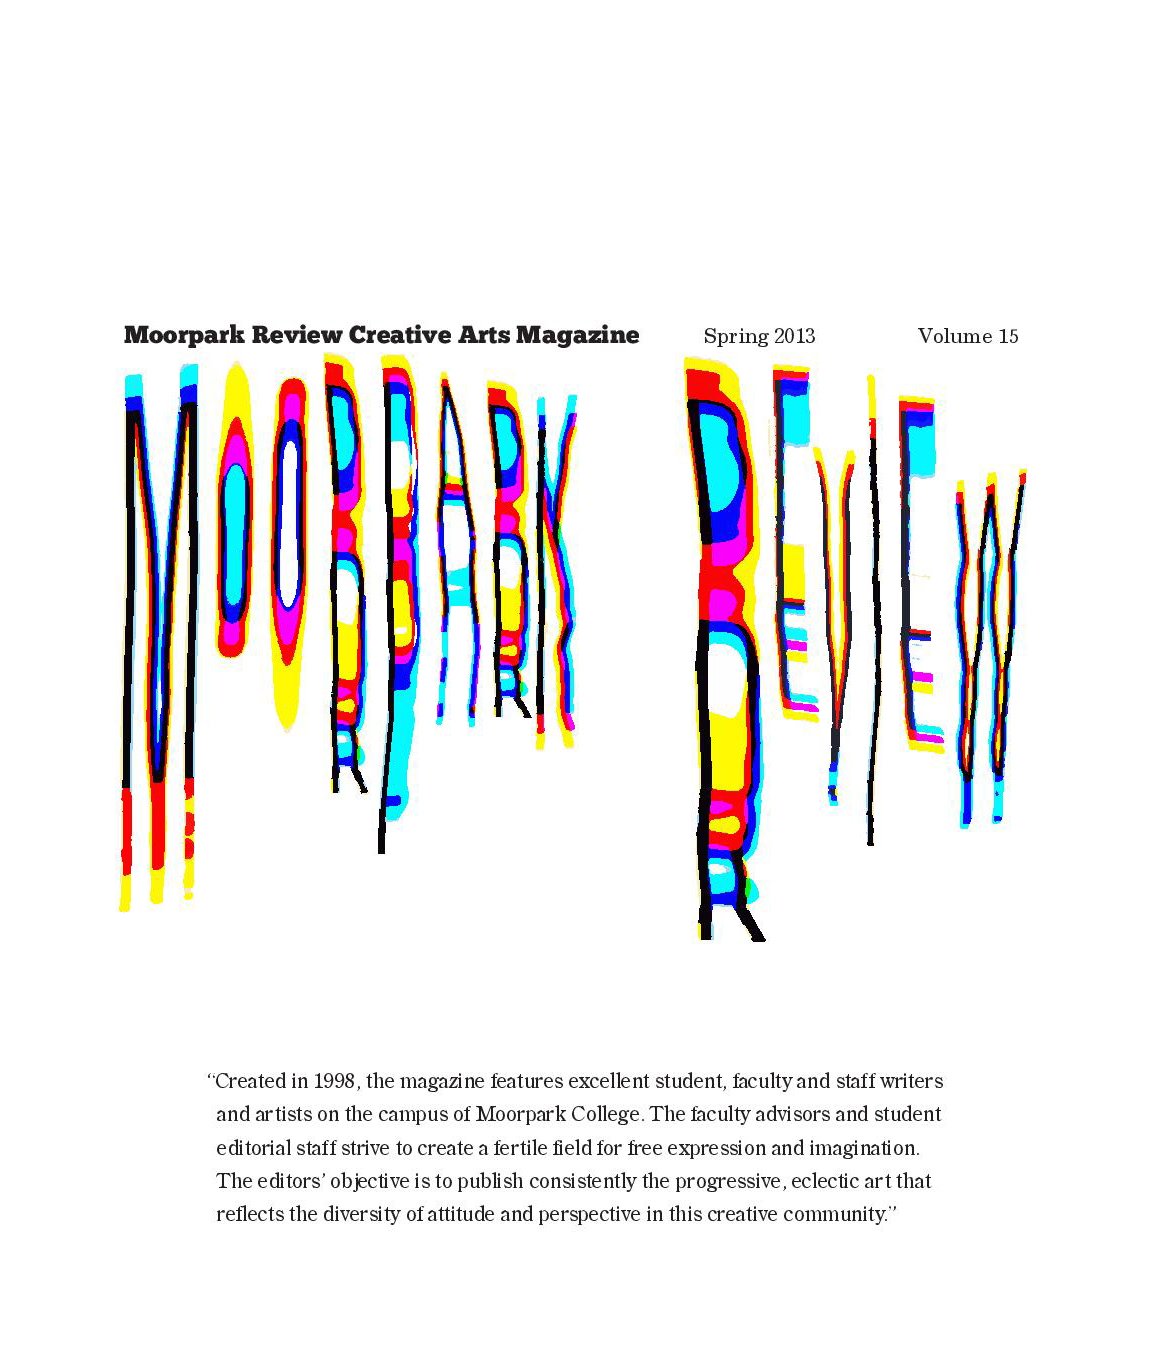 moorparkreview-page-002 copy.jpg